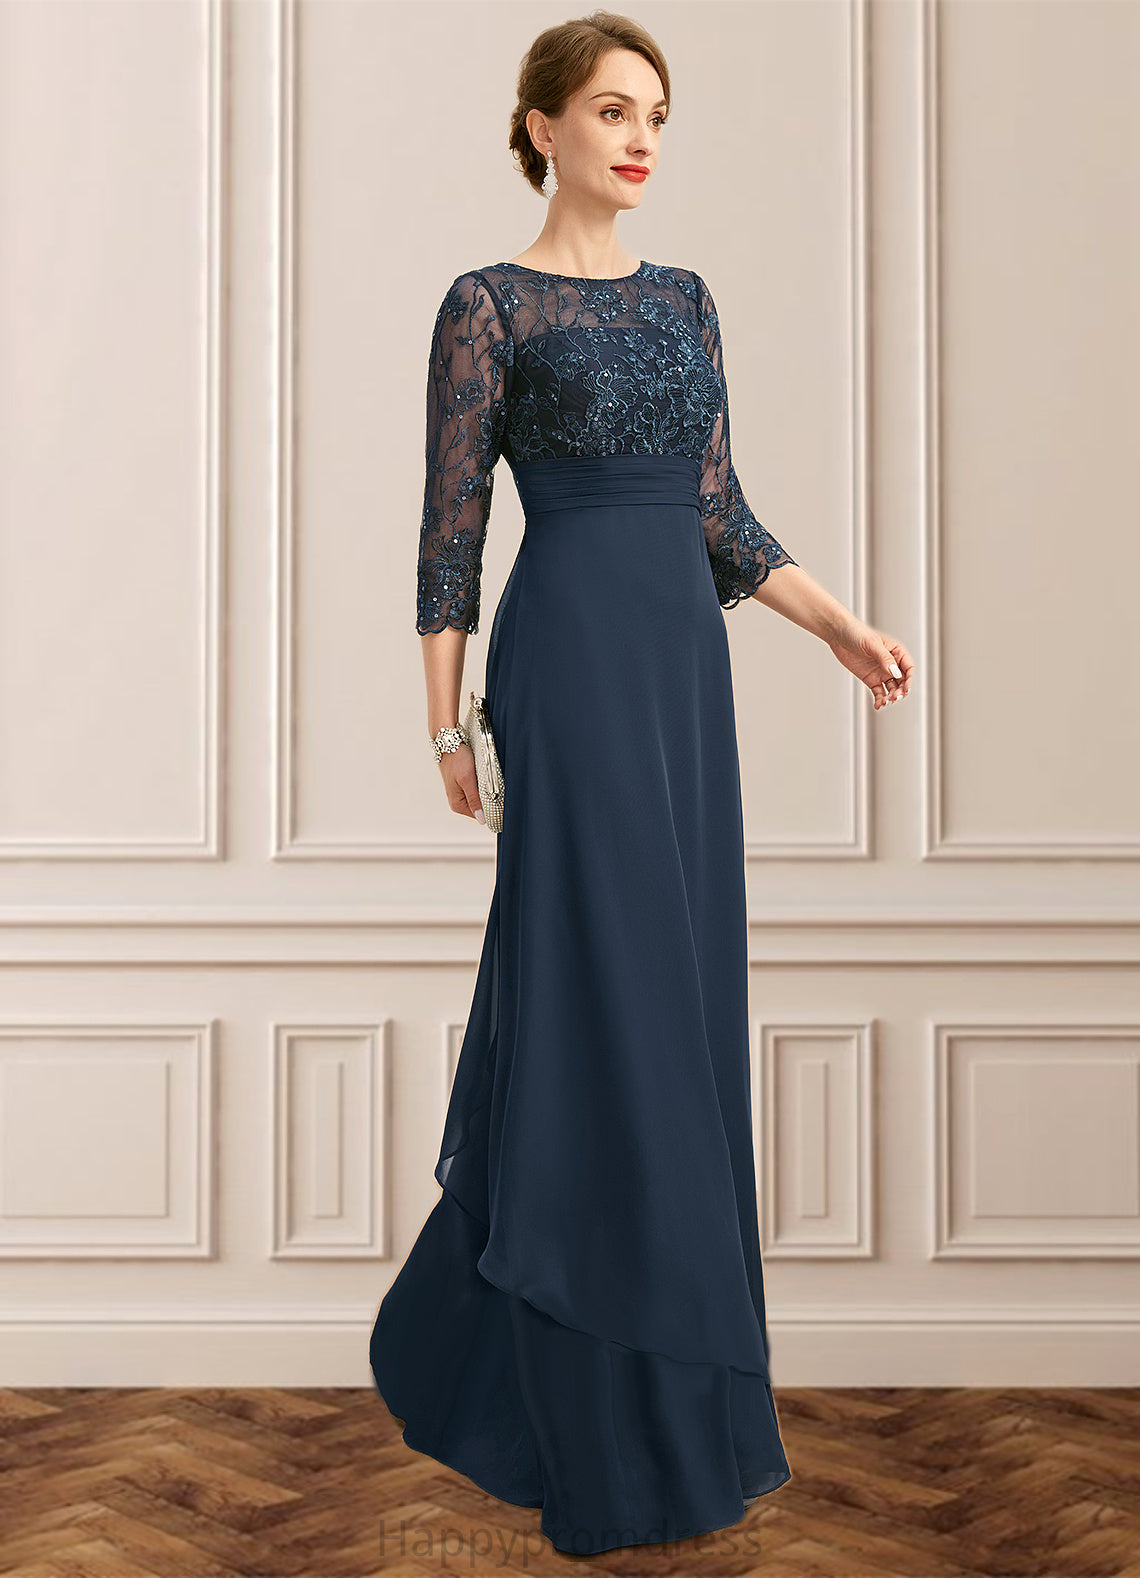 Essence A-line Scoop Illusion Floor-Length Chiffon Lace Mother of the Bride Dress With Pleated Sequins XXSP0021754